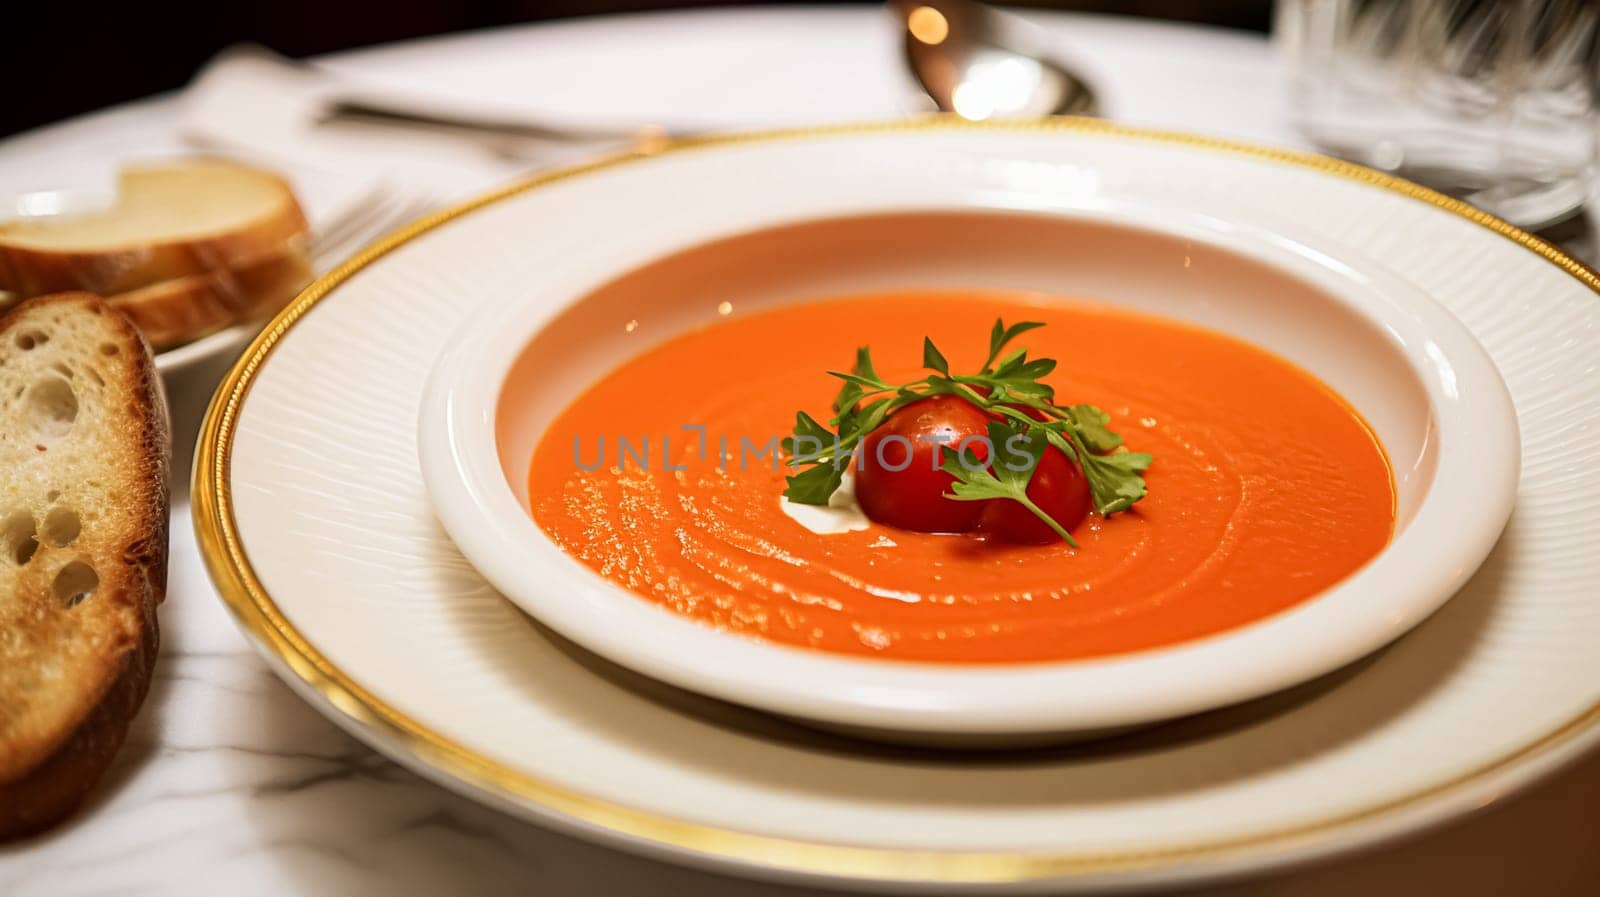 Tomato cream soup in a restaurant, English countryside exquisite cuisine menu, culinary art food and fine dining by Anneleven